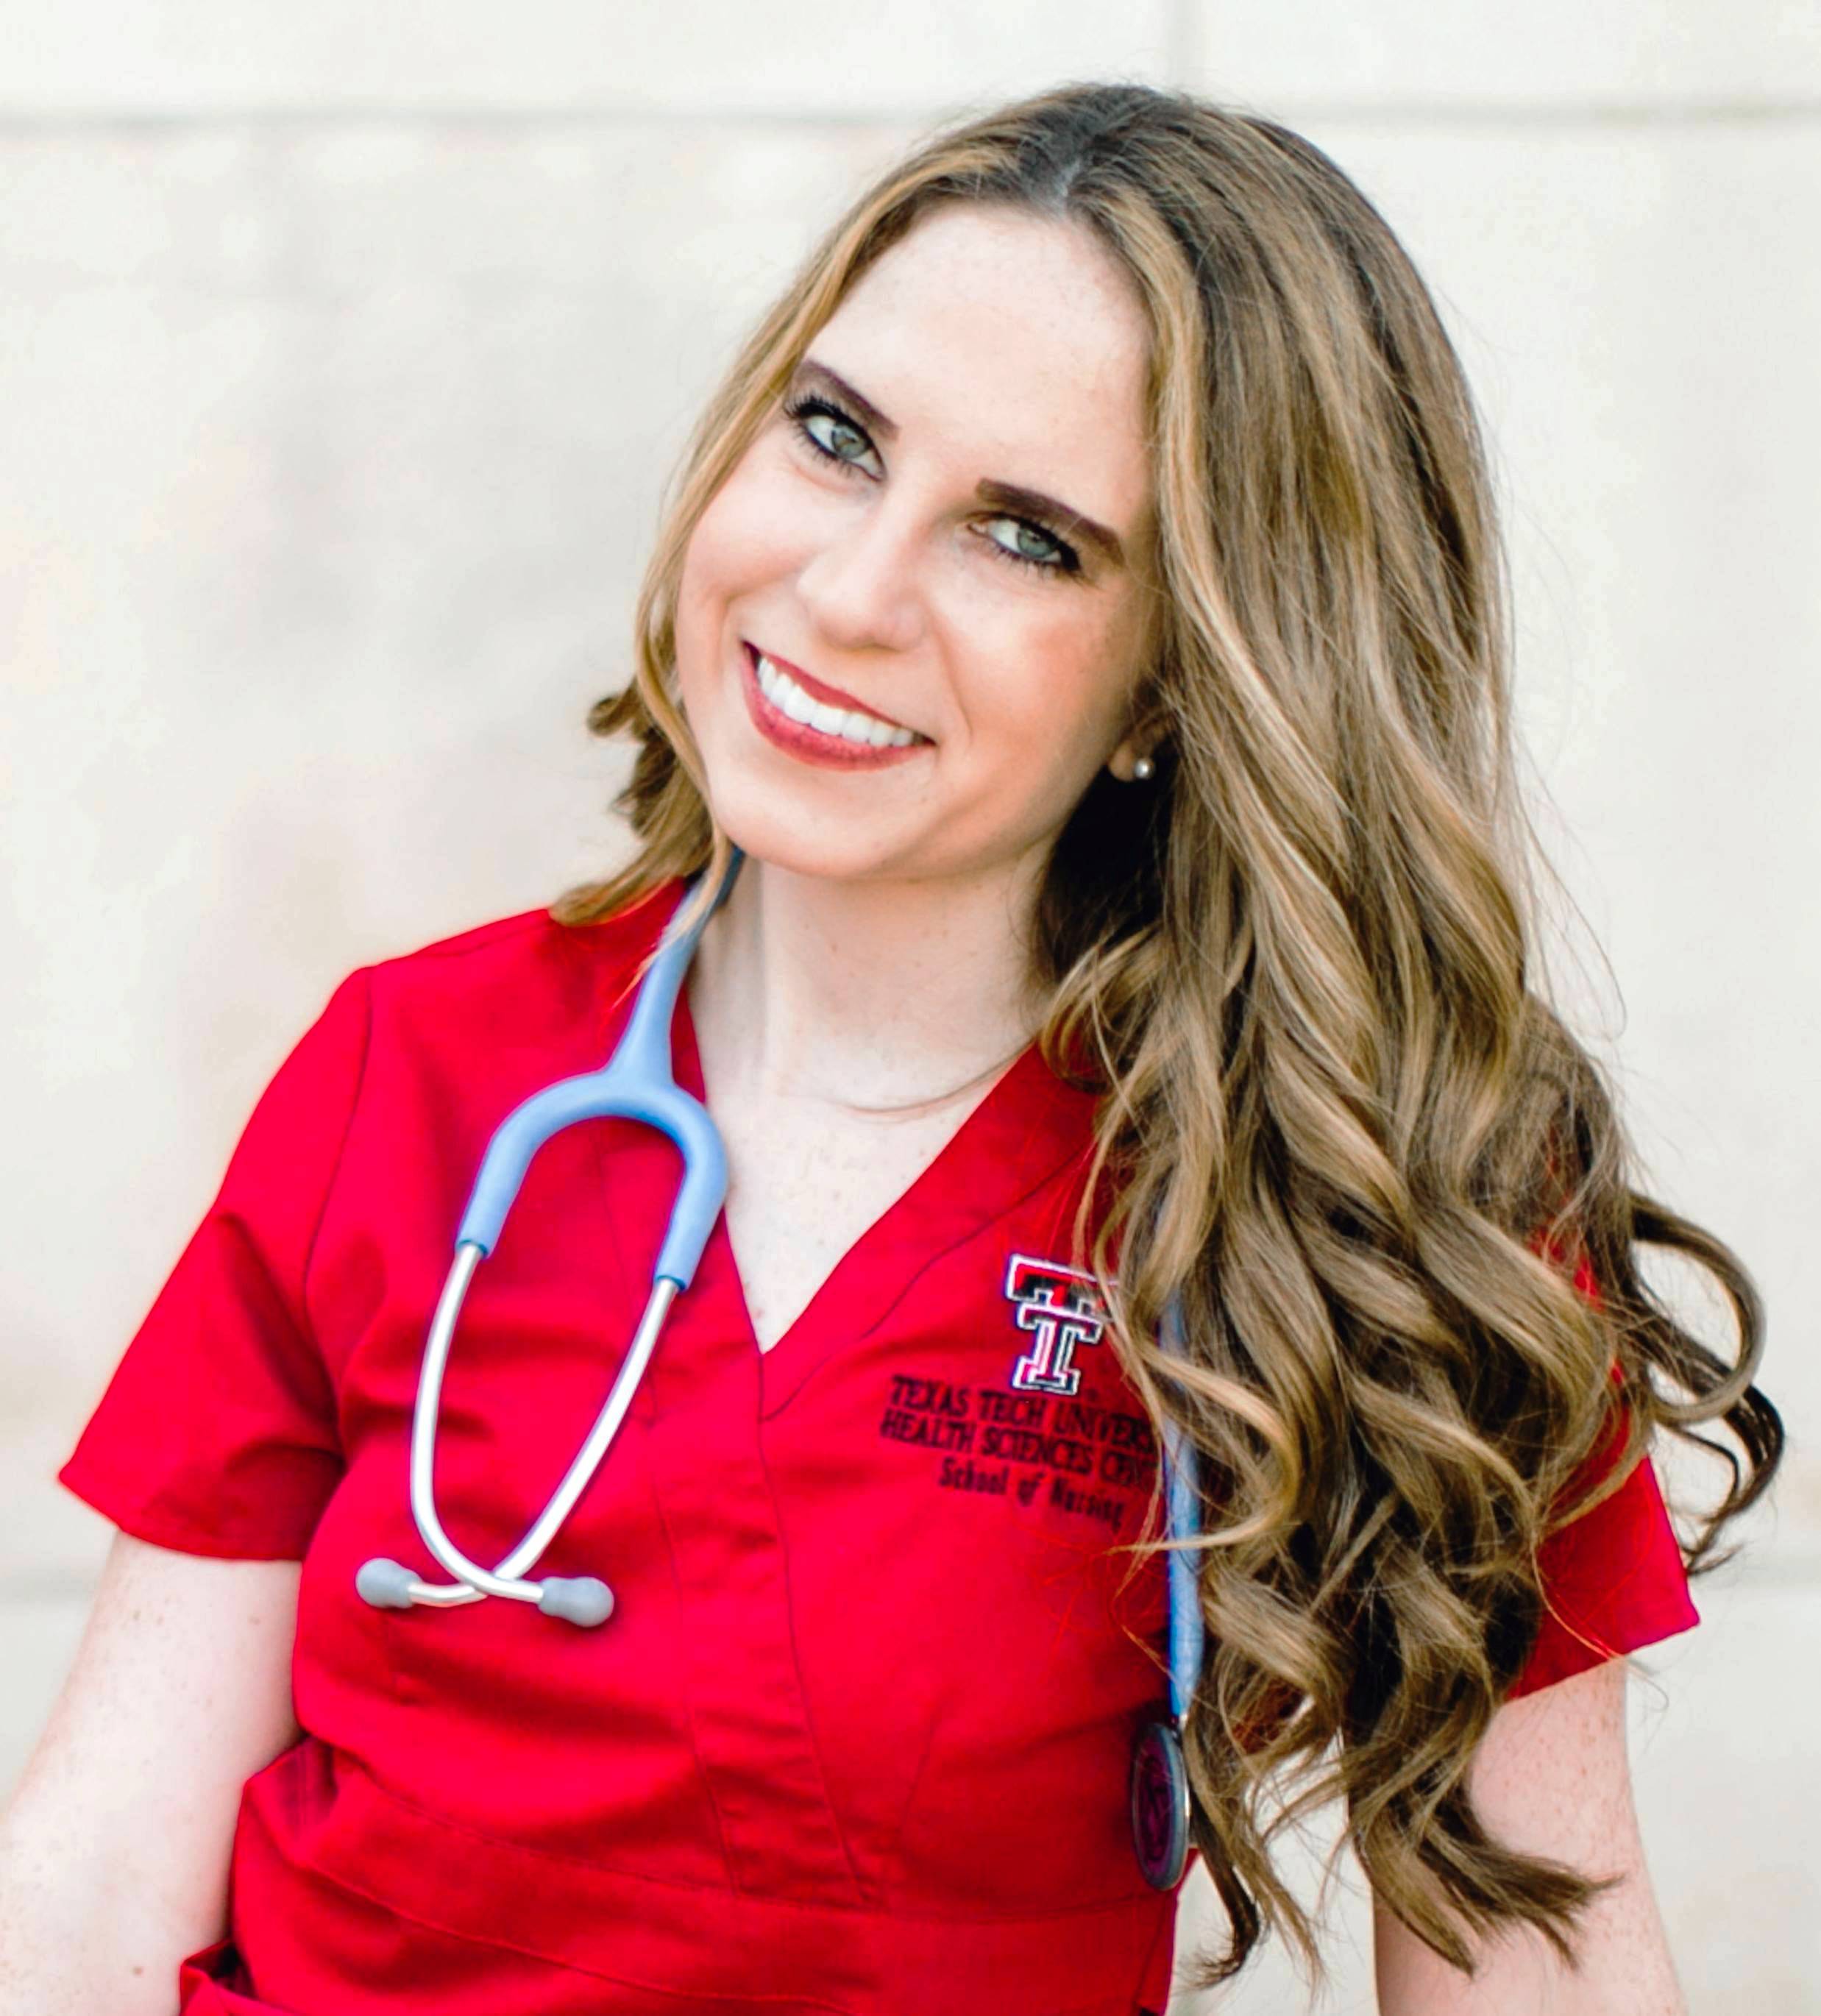 A person wearing a red scrubs

Description automatically generated